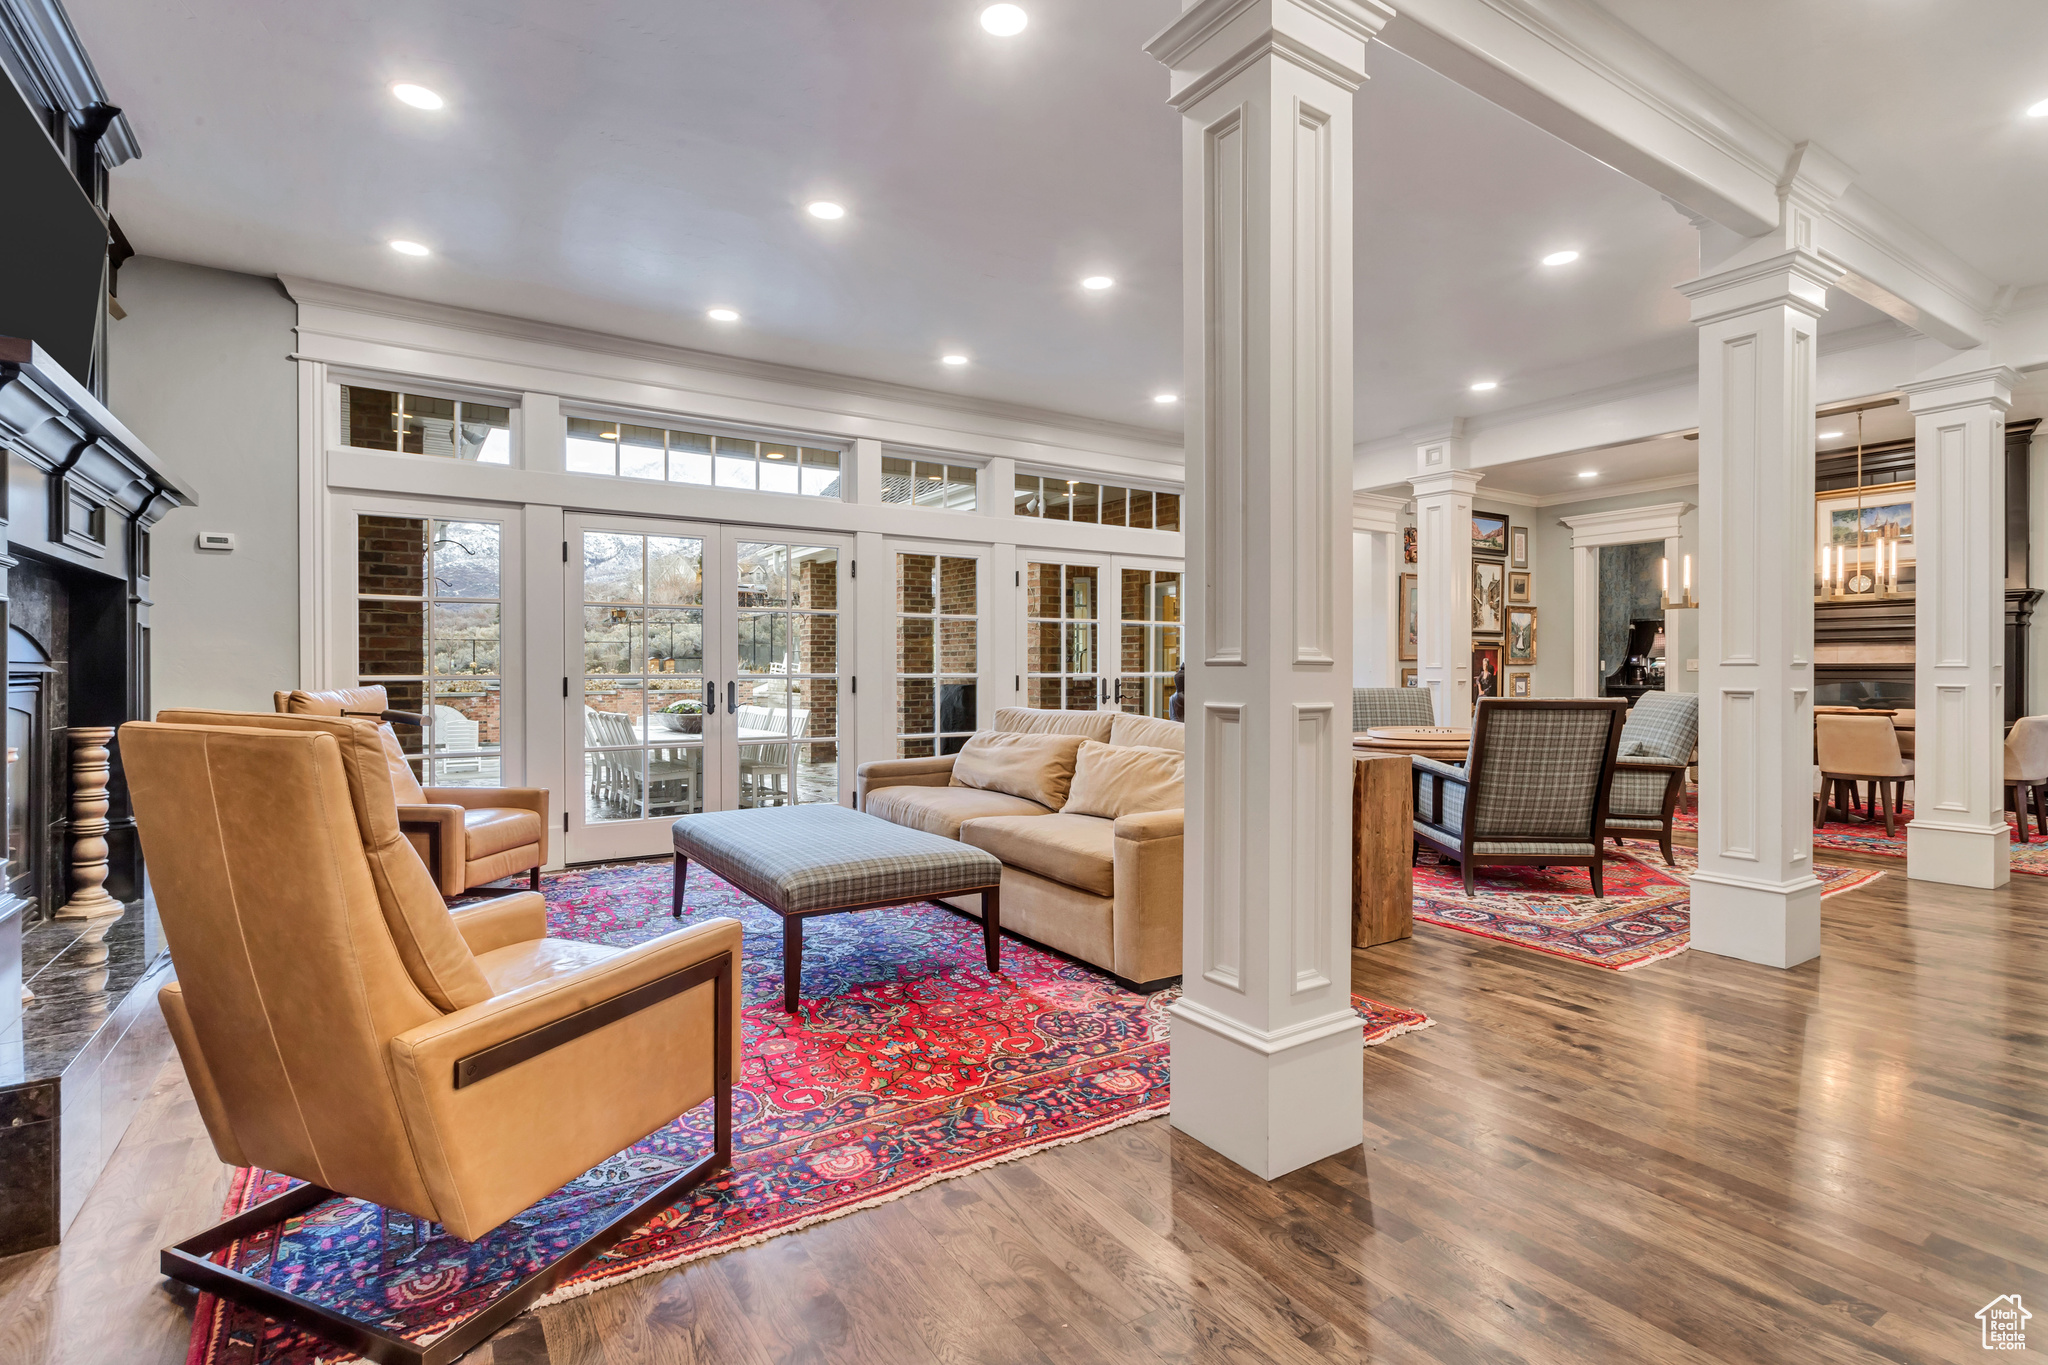 Living room featuring hardwood / wood floors, crown molding, and decorative columns